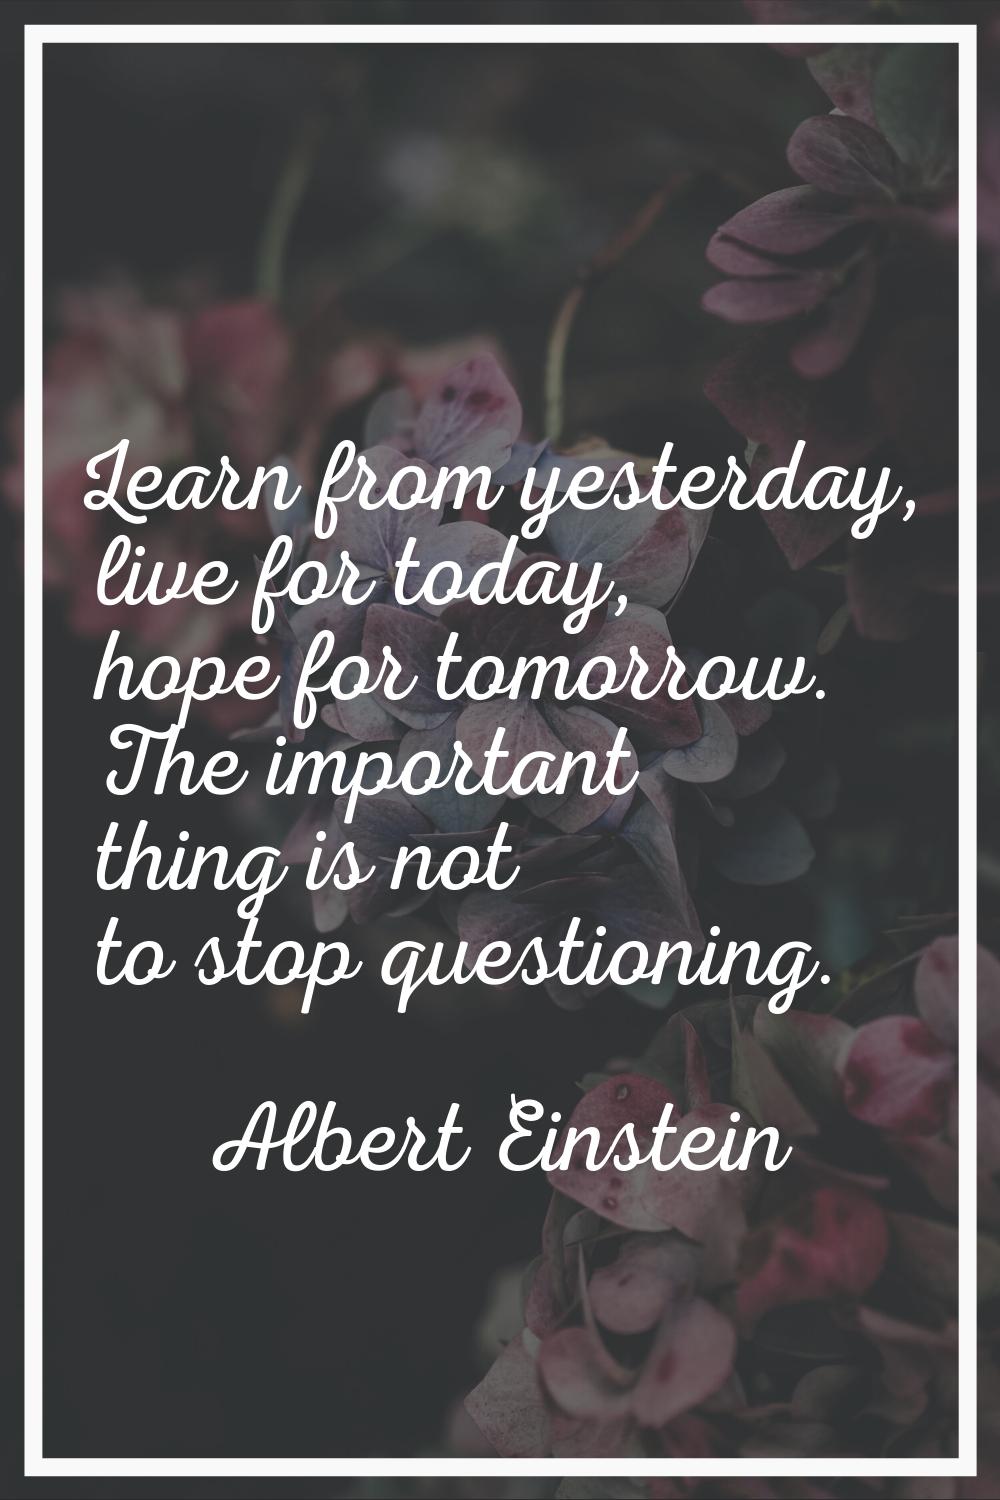 Learn from yesterday, live for today, hope for tomorrow. The important thing is not to stop questio